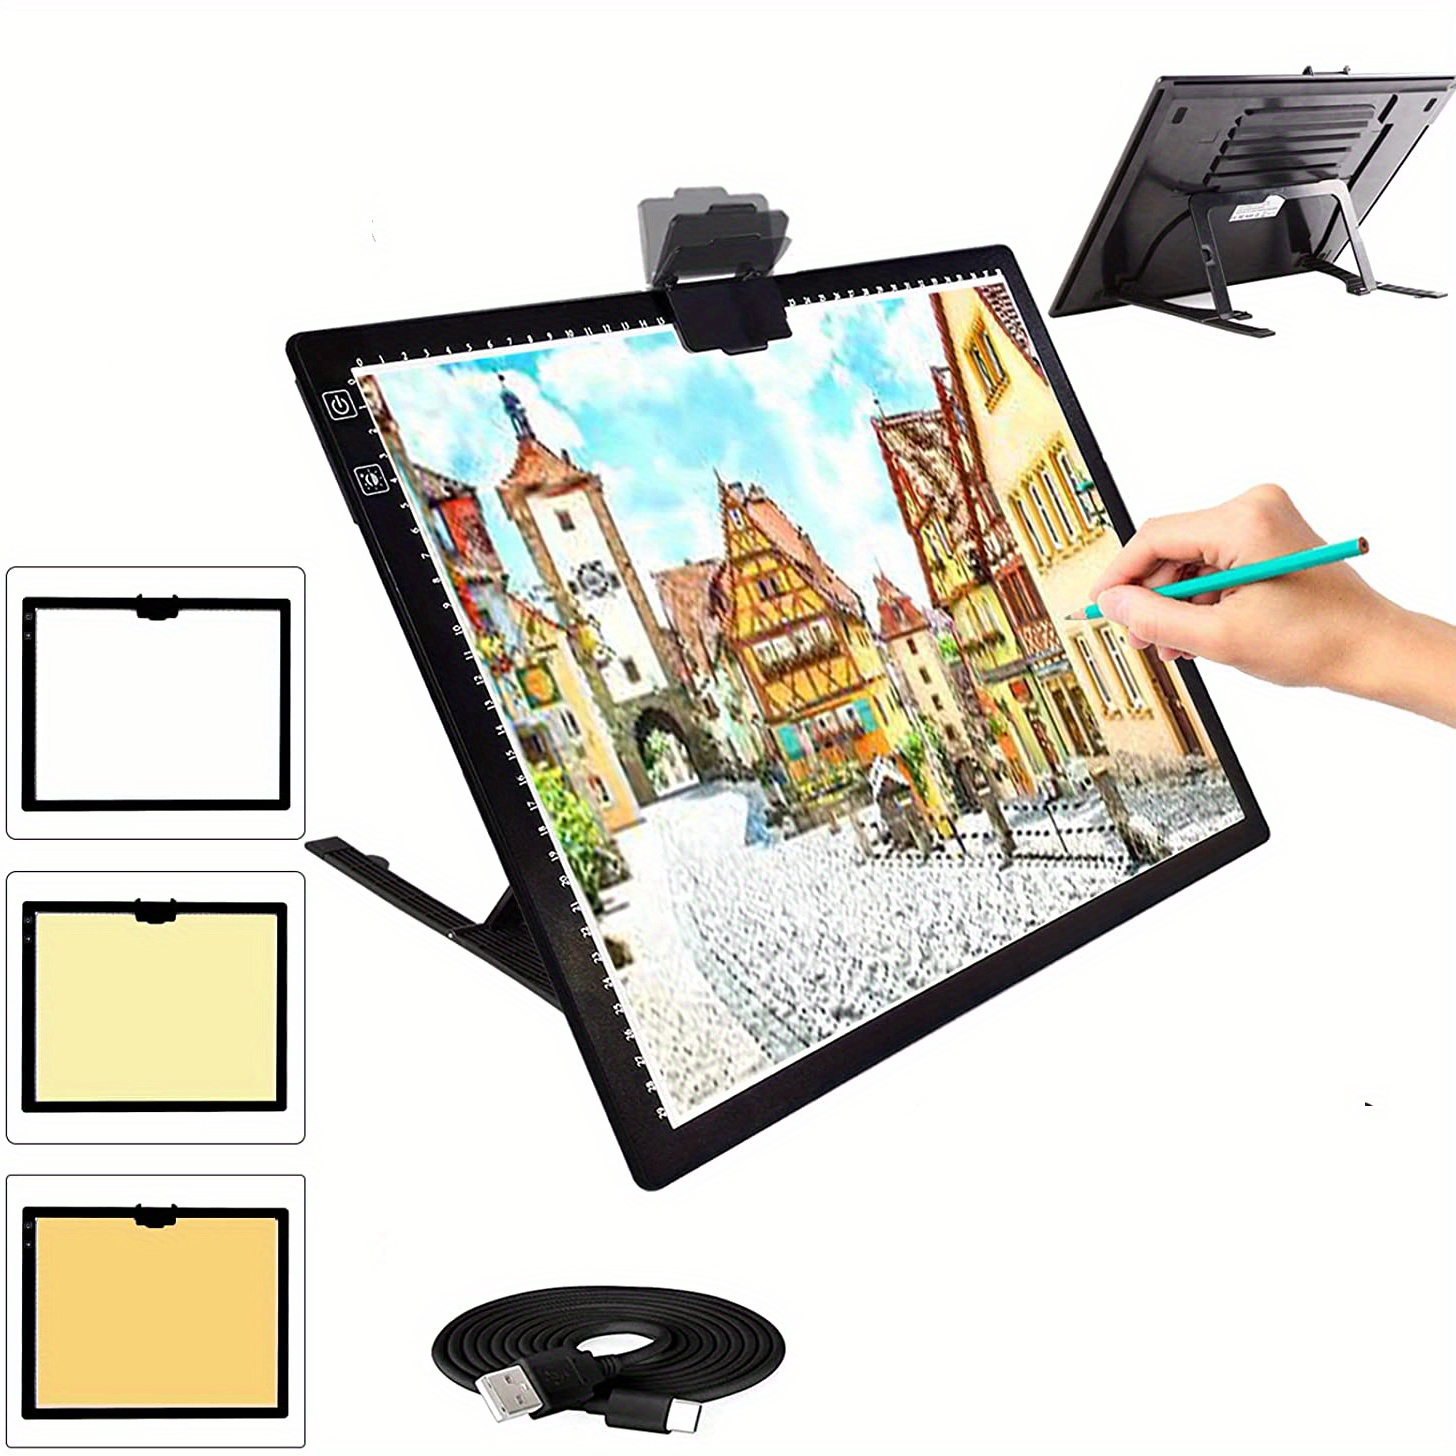 Rechargeable A4 LED Light Box, Innovative Stand and Top Clip